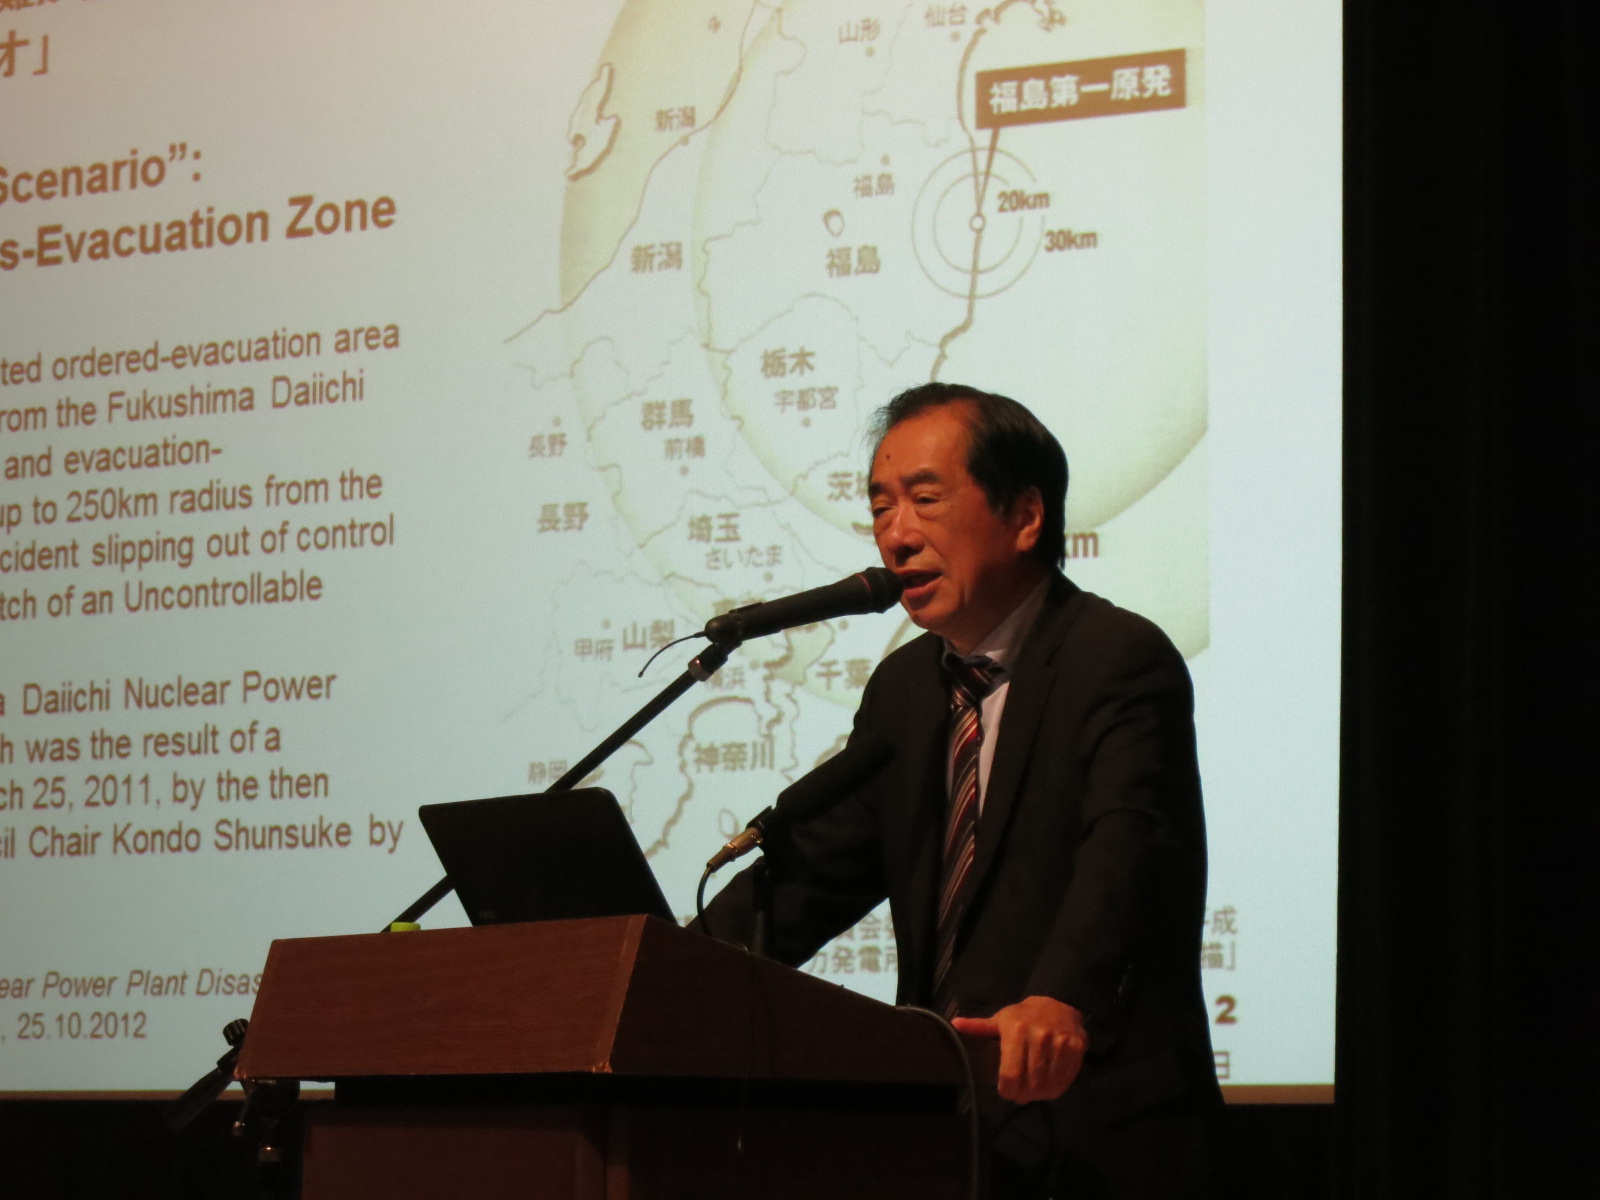 Former Prime Minister Naoto Kan speaks about his experience with the Fukushima nuclear disaster to foreign residents in Tokyo during a lecture Wednesday. | KAZUAKI NAGATA